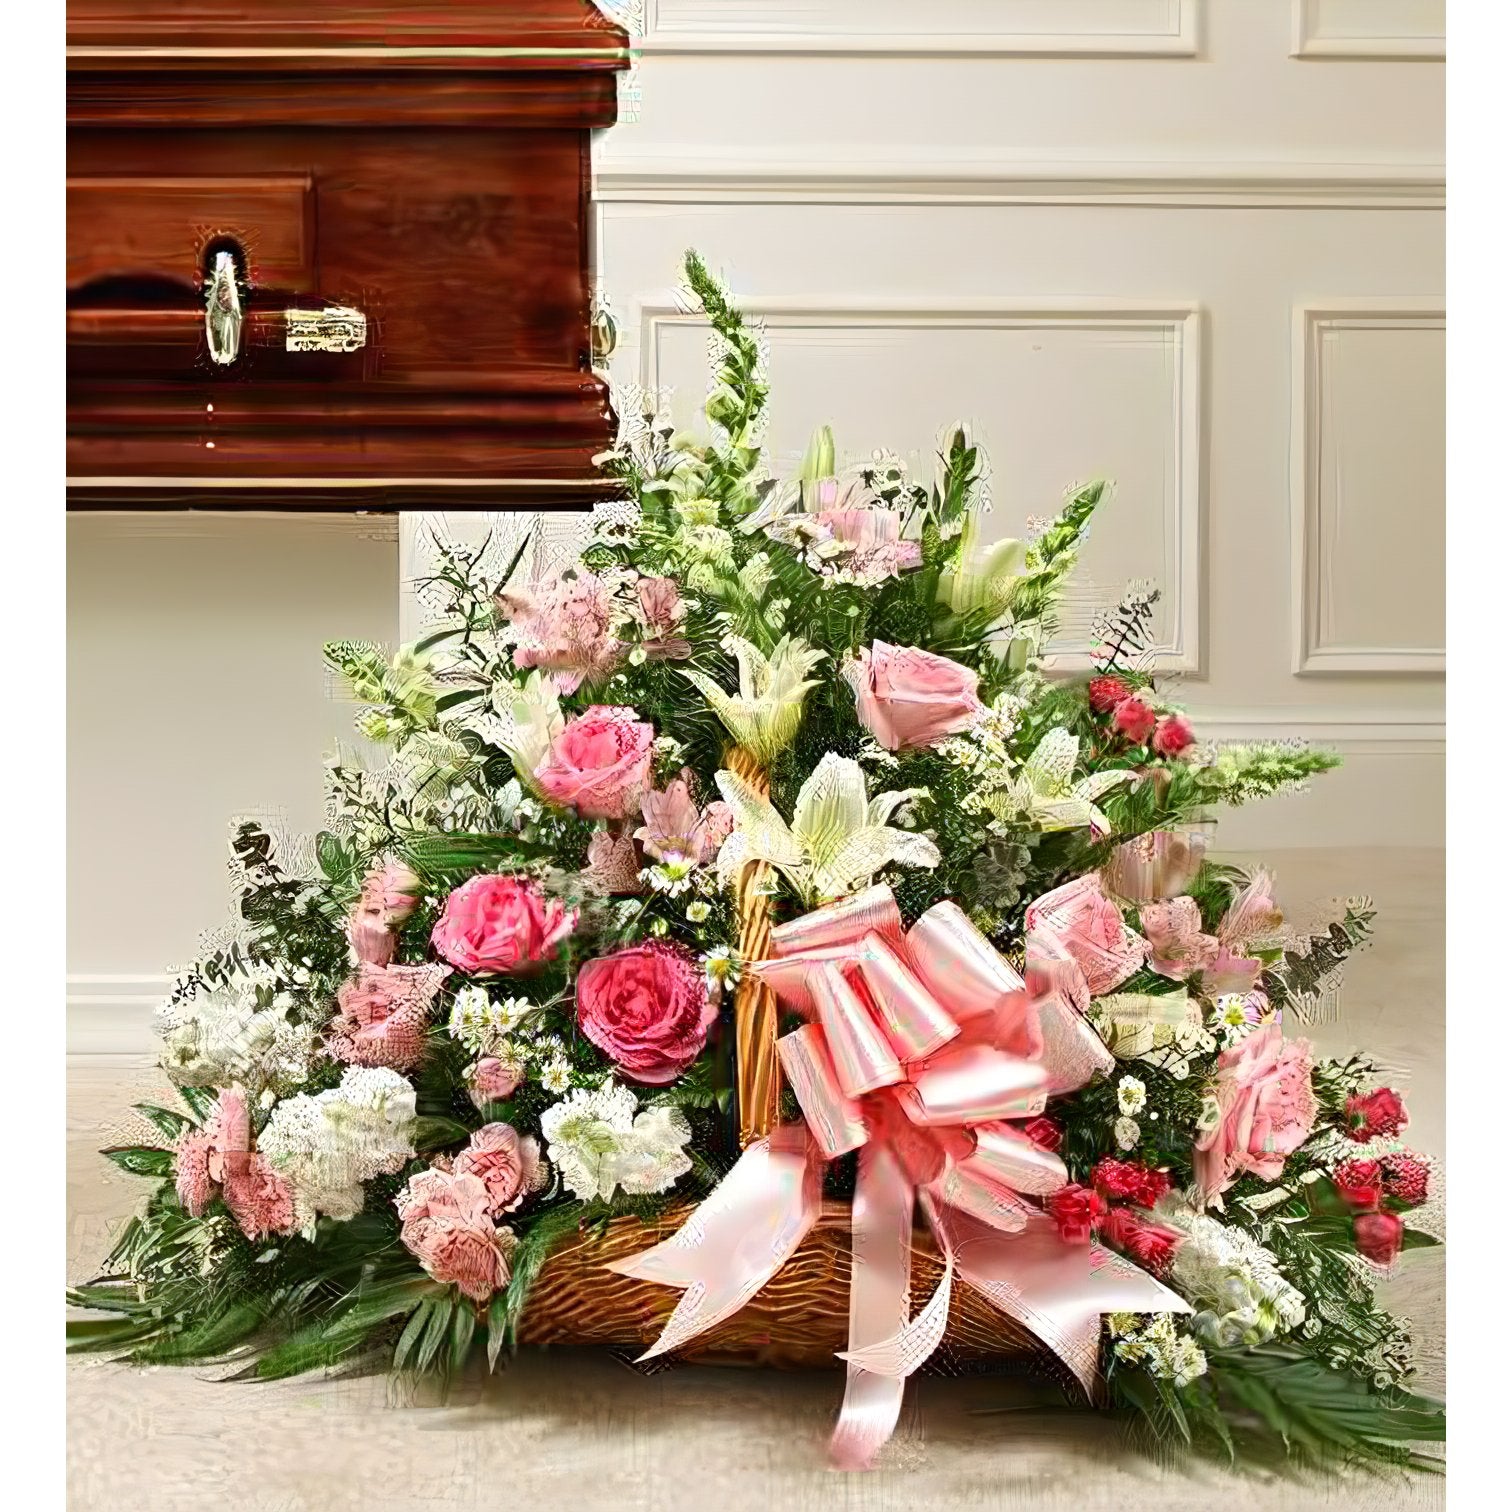 Sincerest Sympathies Fireside Basket-Pink &amp; White - Funeral > For the Service - Queens Flower Delivery